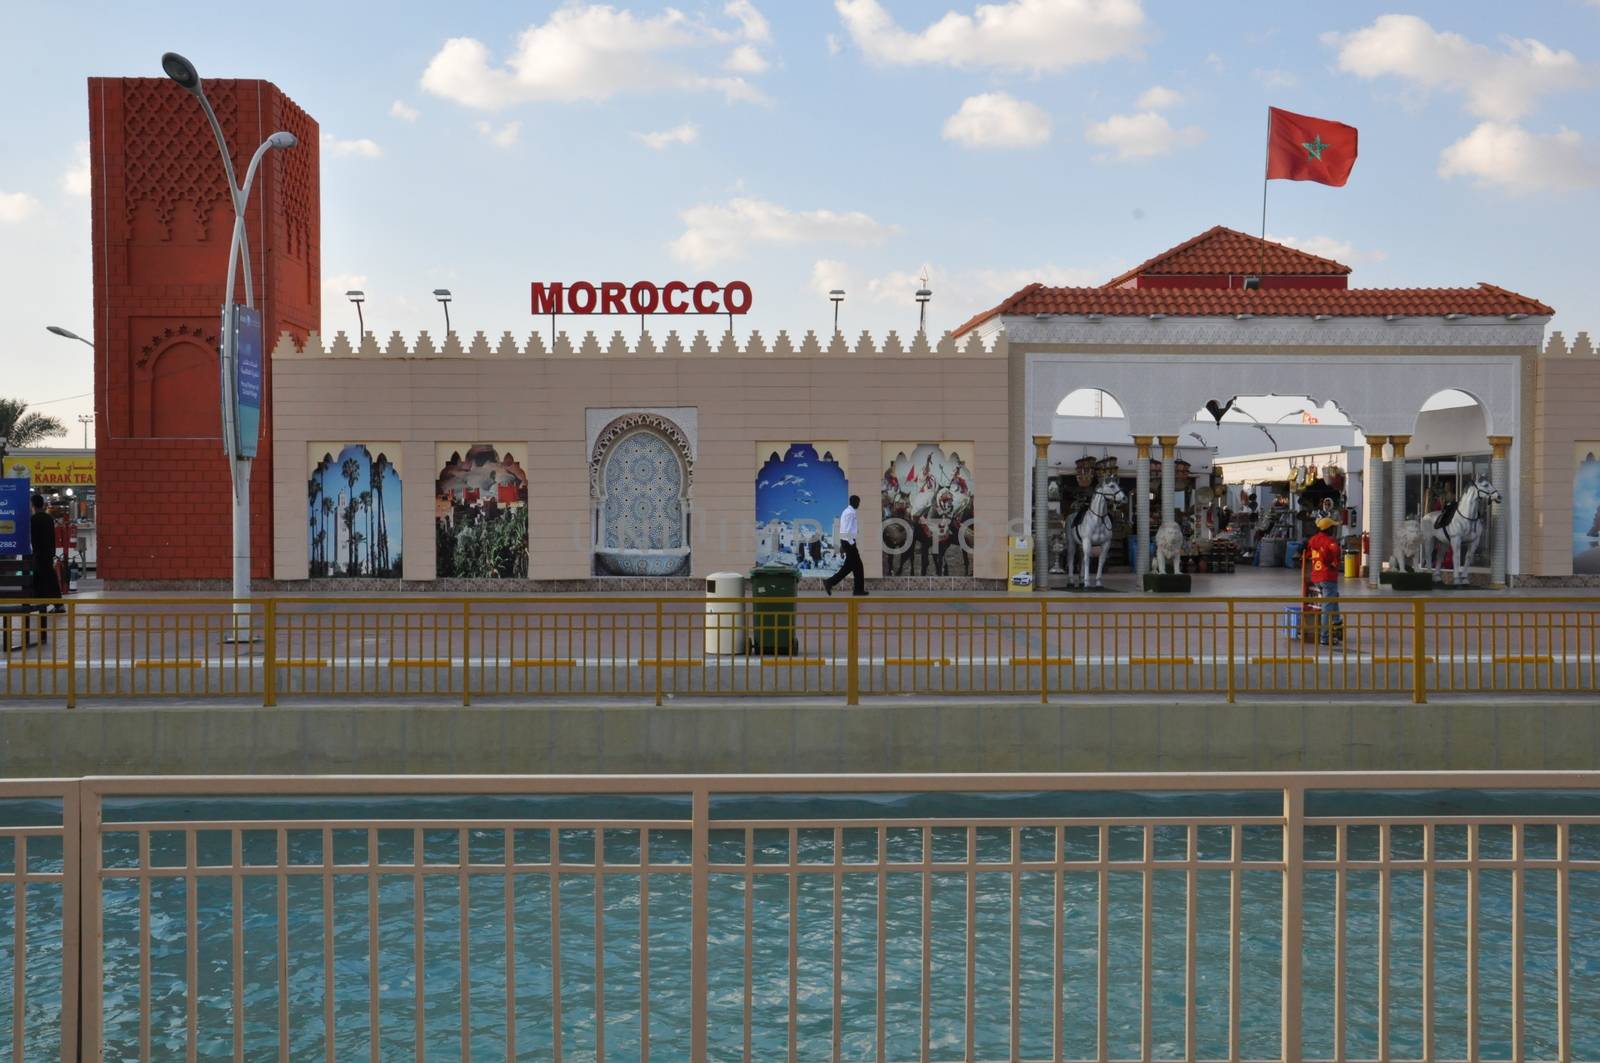 Morocco pavilion at Global Village in Dubai, UAE. It is claimed to be the world's largest tourism, leisure and entertainment project.